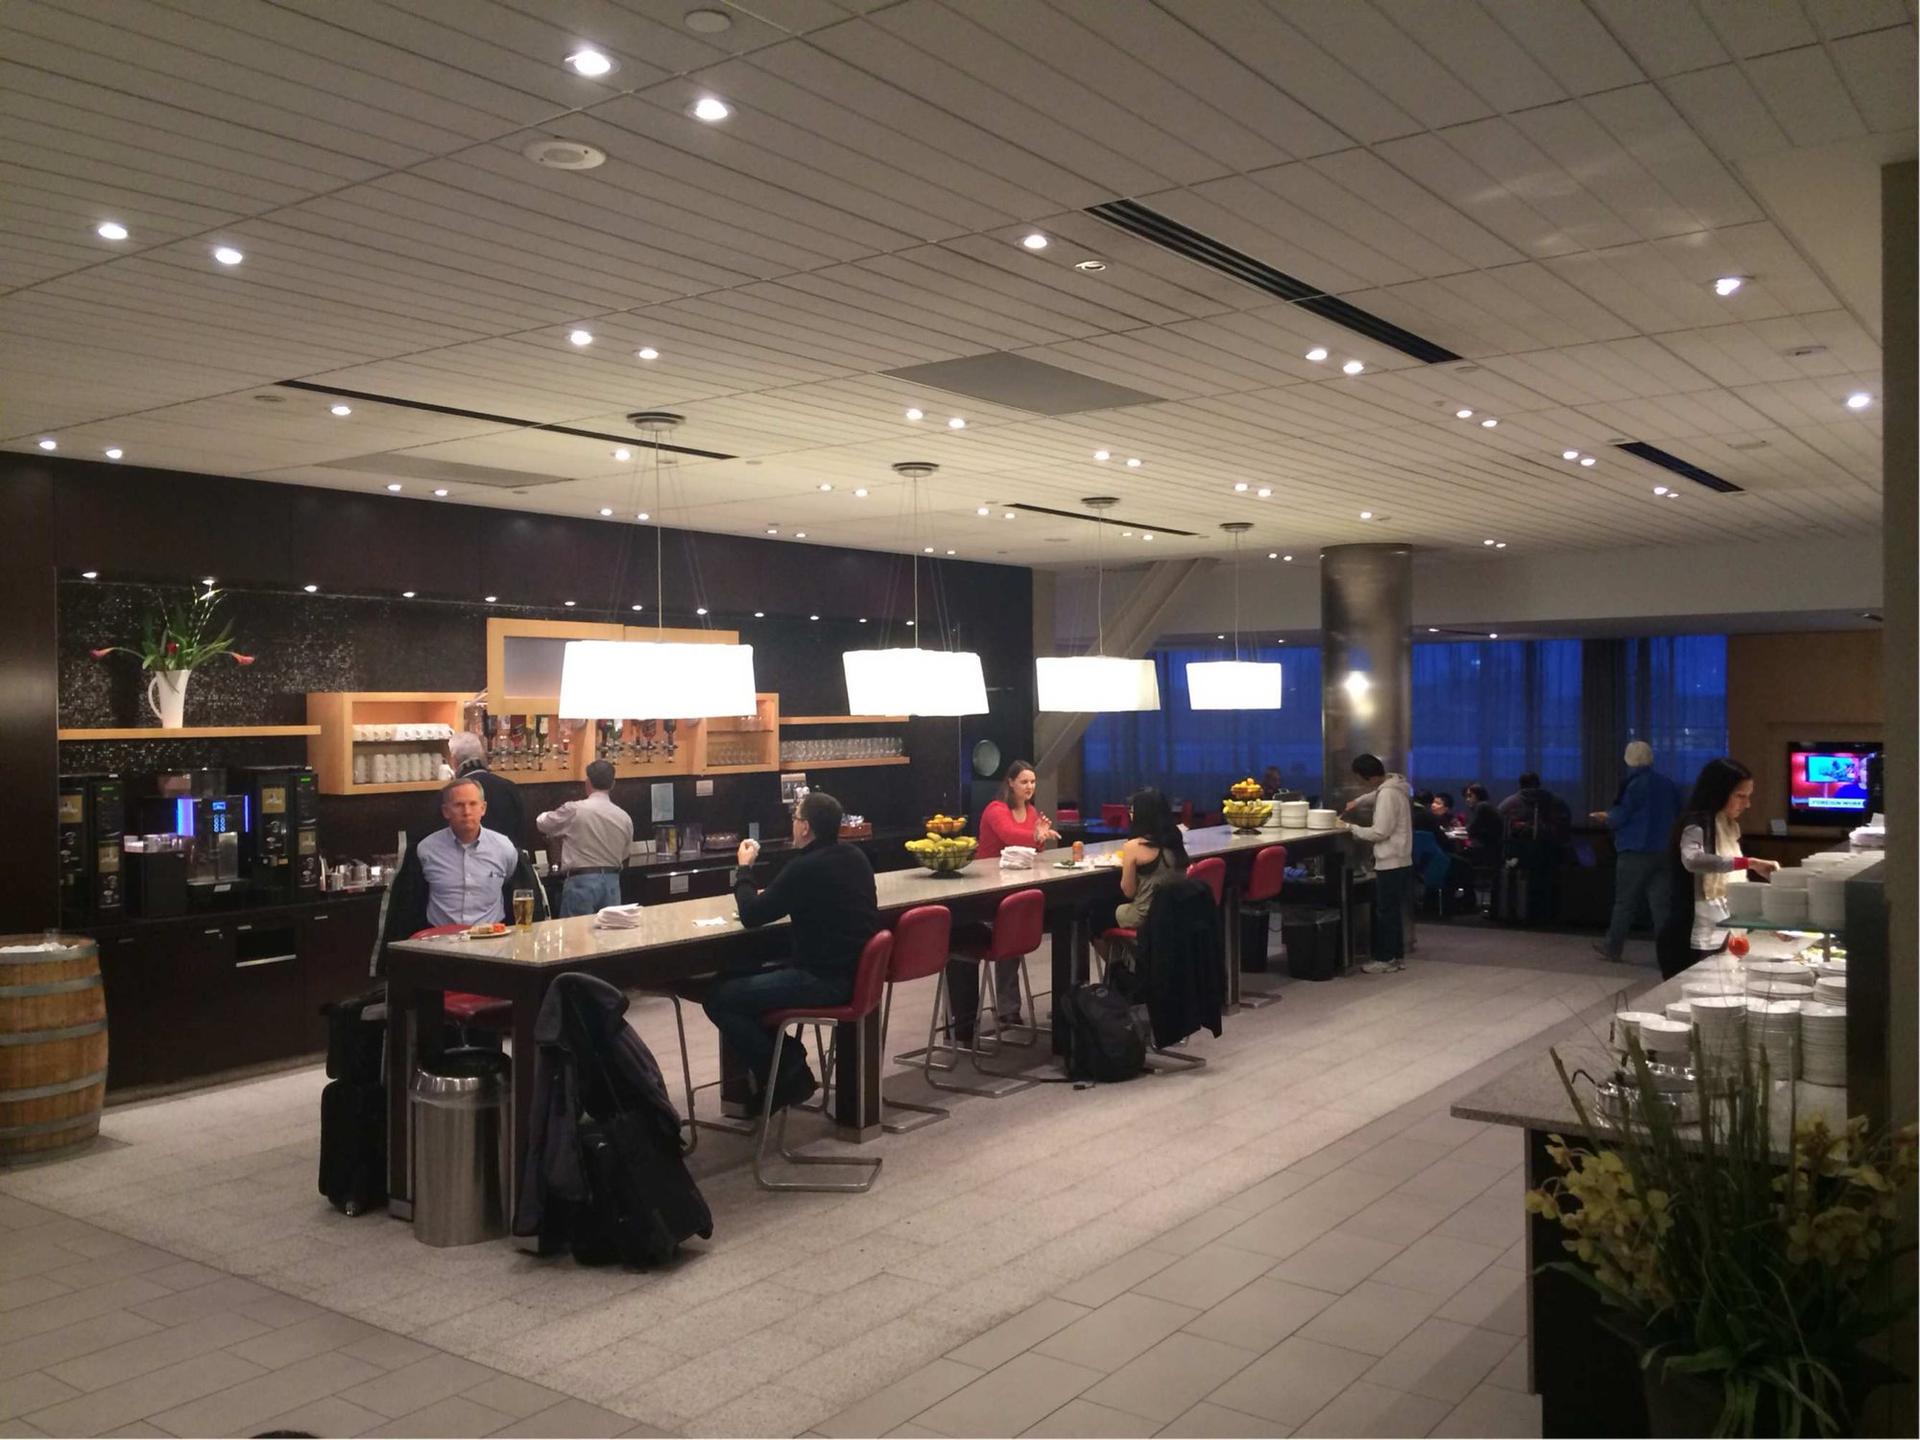 Air Canada Maple Leaf Lounge image 9 of 21